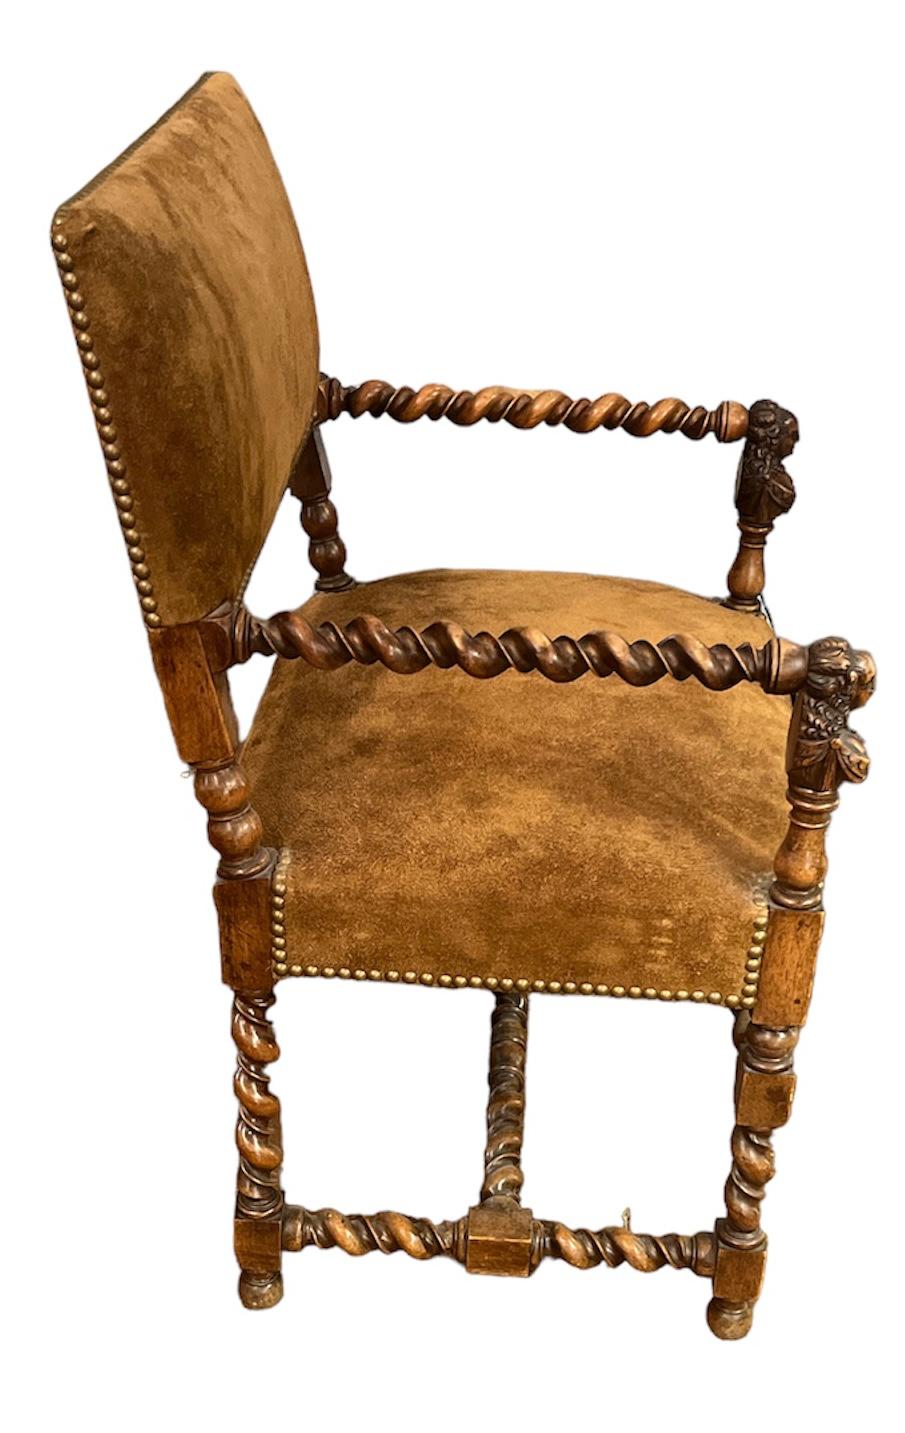 Pair of E. 19thc English Hand Carved Barley Twist And Suede Arm Chairs. 
The arms are carved with a figure of a woman in front.  The Arms and legs have the twist carving to them. The leather is in great condition. 
